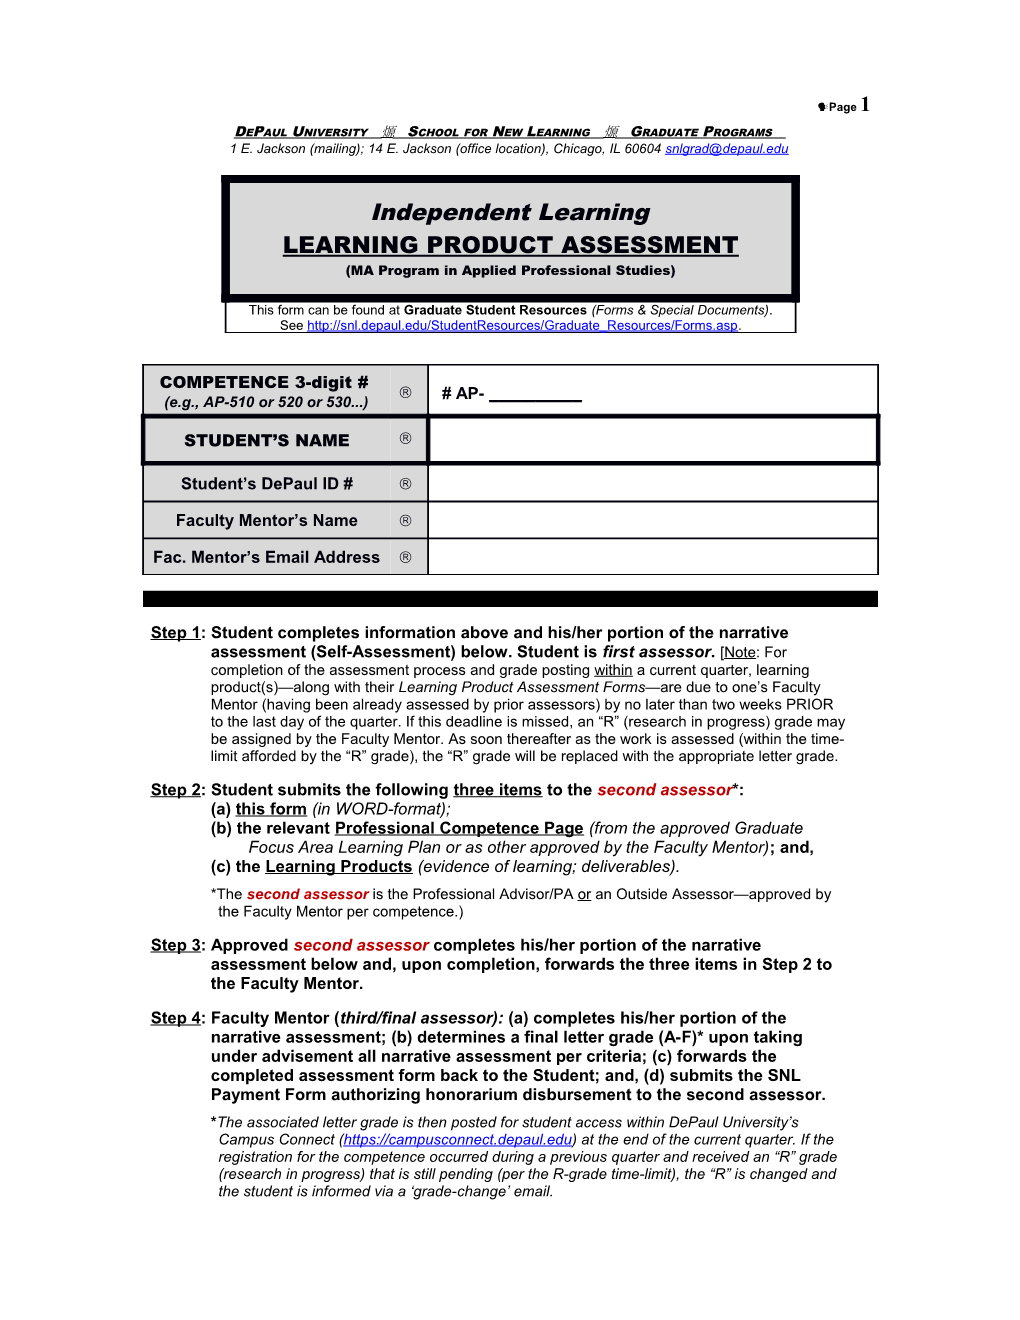 MAAPS Learning Product Assessment Form